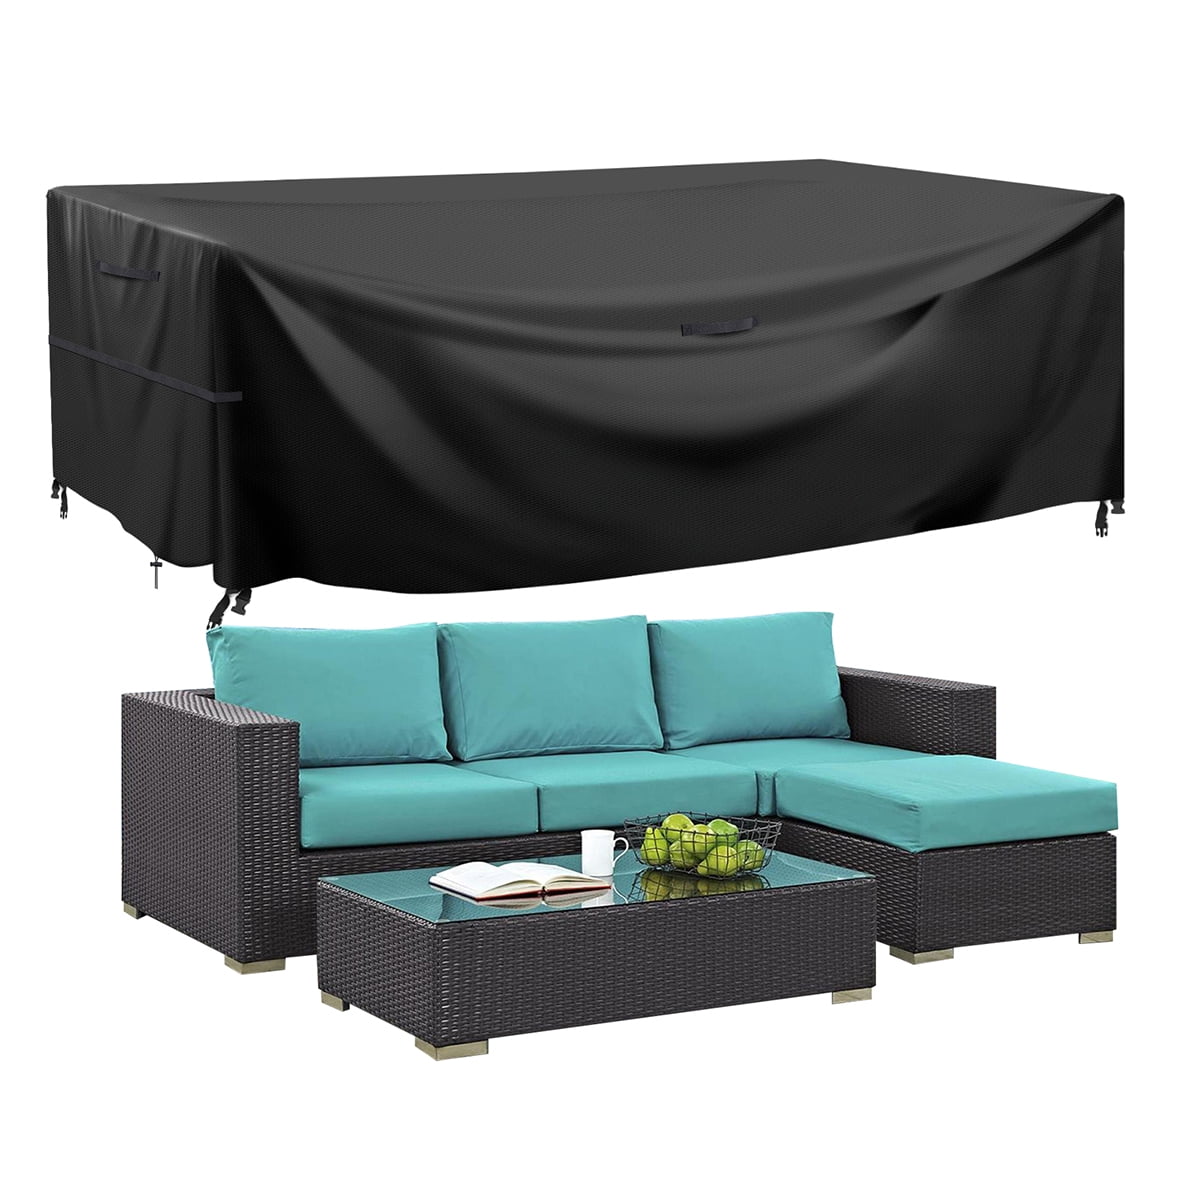 Patio Furniture Cover Outdoor Sofa Covers Dust-Proof and Wind Proof Garden Waterproof Loveseat Lounge Bench Cover M UV Protection 